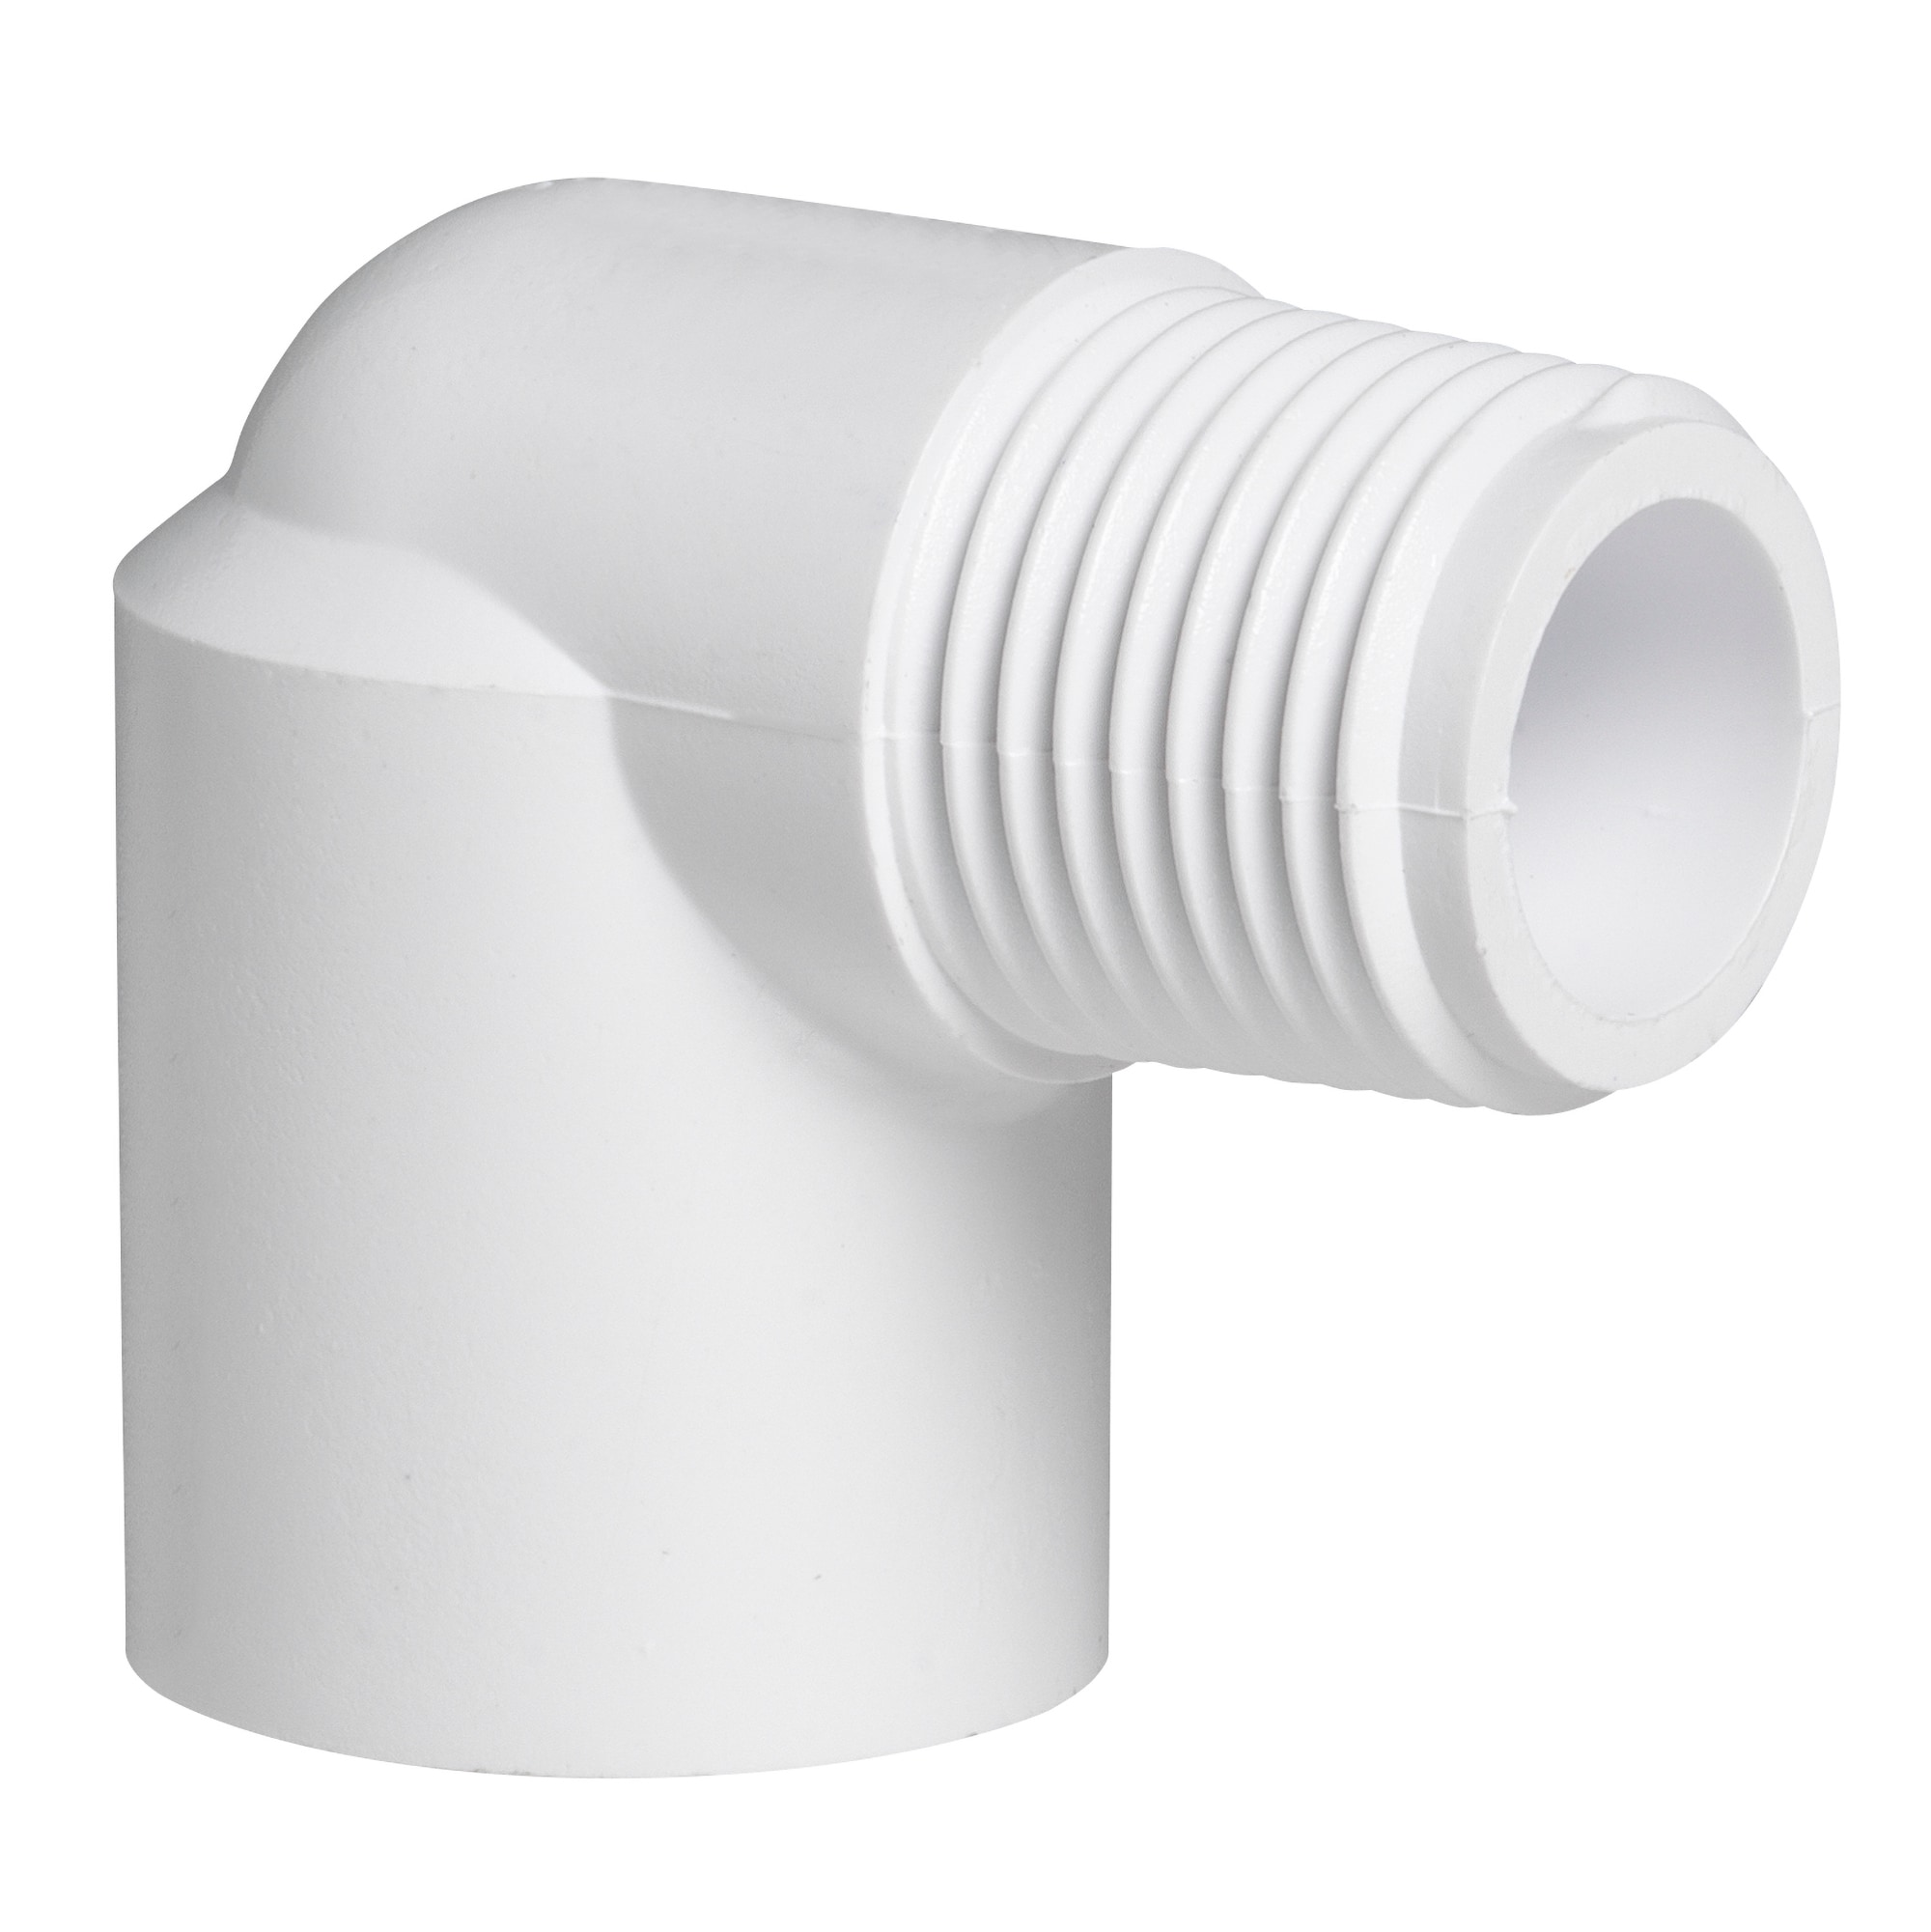 Homewerks 1 2 In X 1 2 In 90 Degree 480 Psi Slip Elbow Pvc Elbow In The Pvc Pipe Fittings Department At Lowes Com